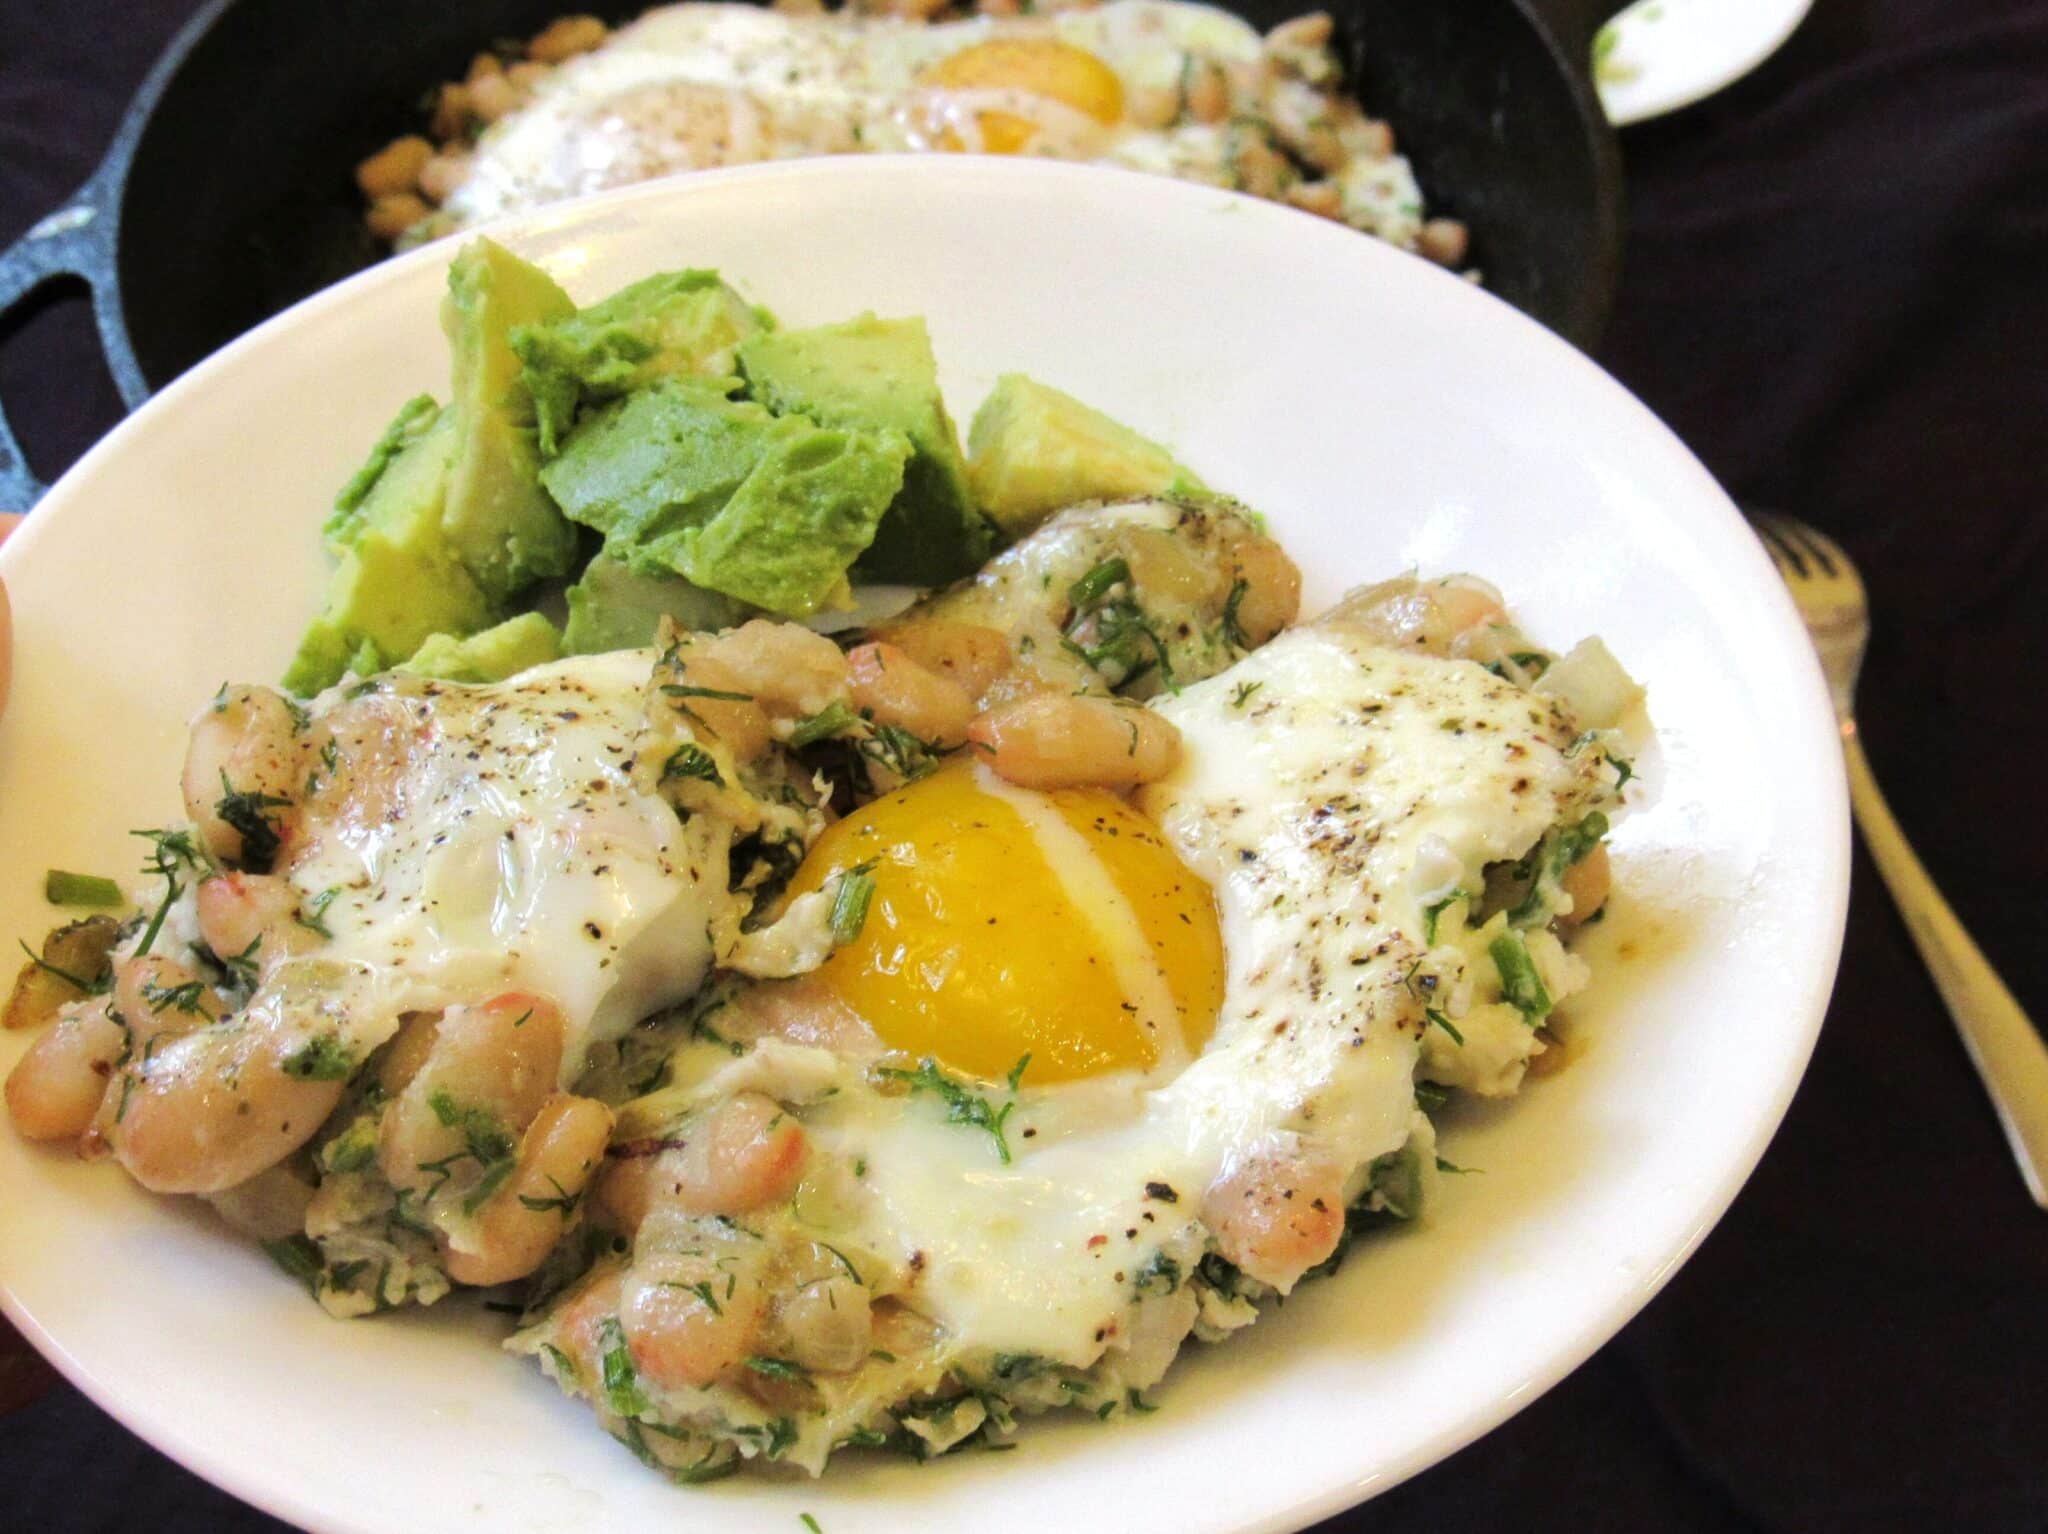 Eggs and beans with avocado slices are served on a white plate.